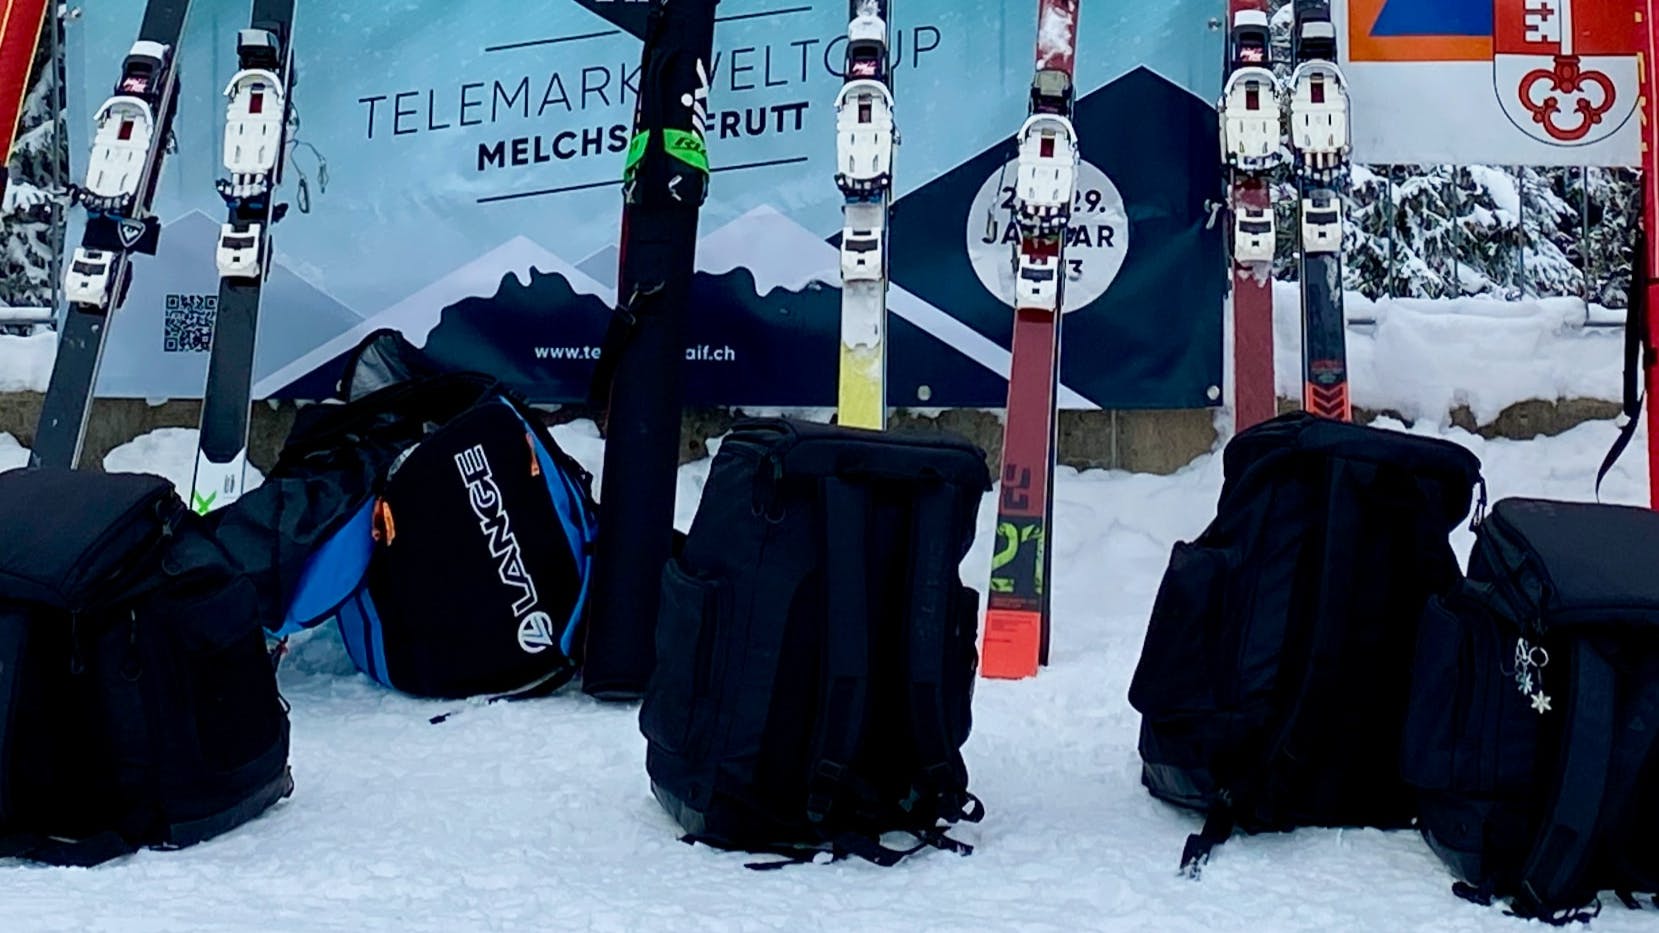 Several pairs of skis and ski boot bags in the snow. 